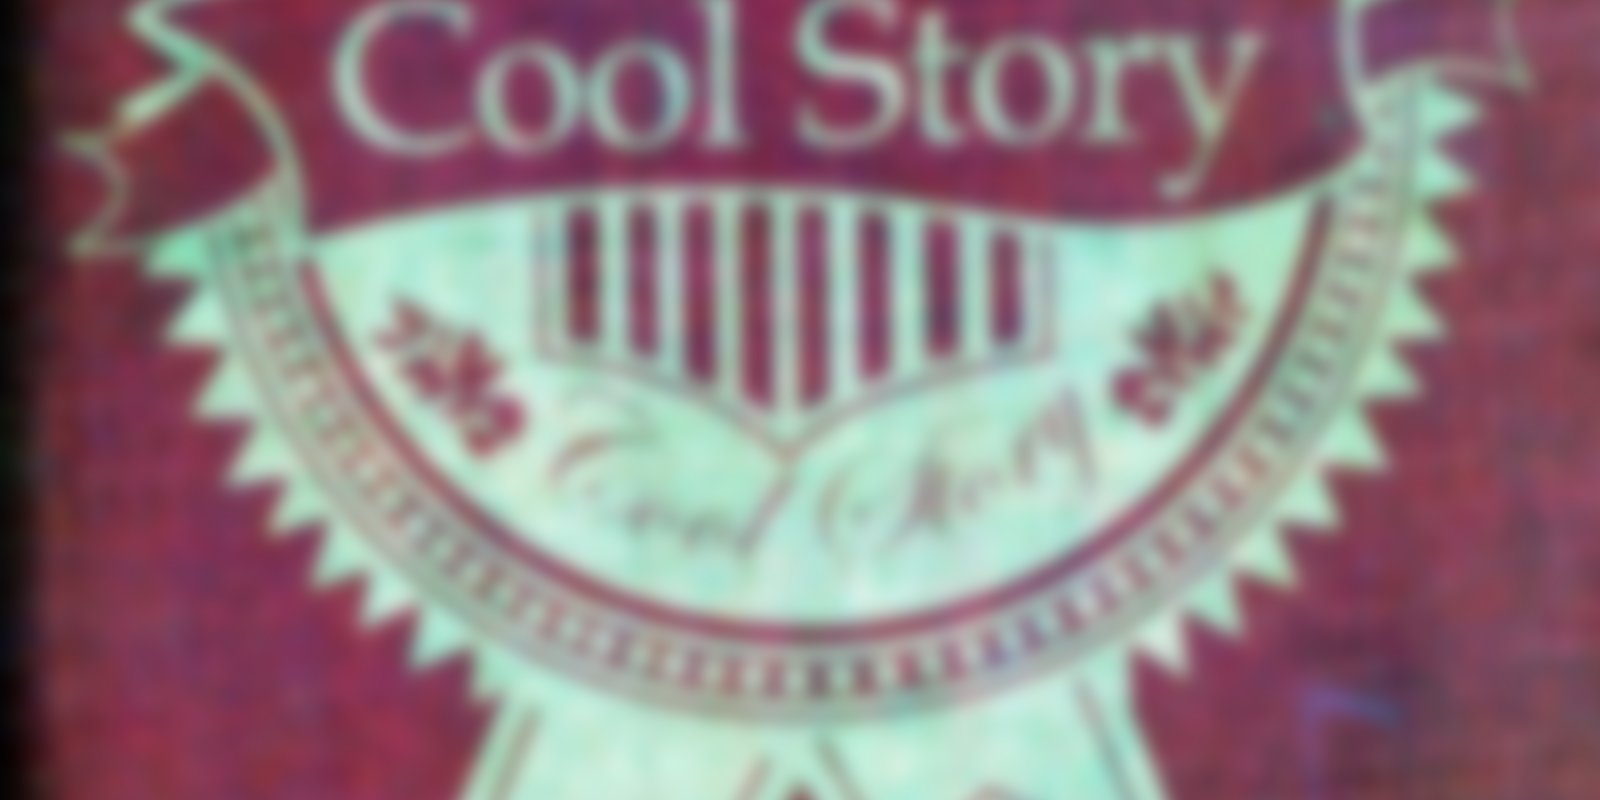 Cool Story